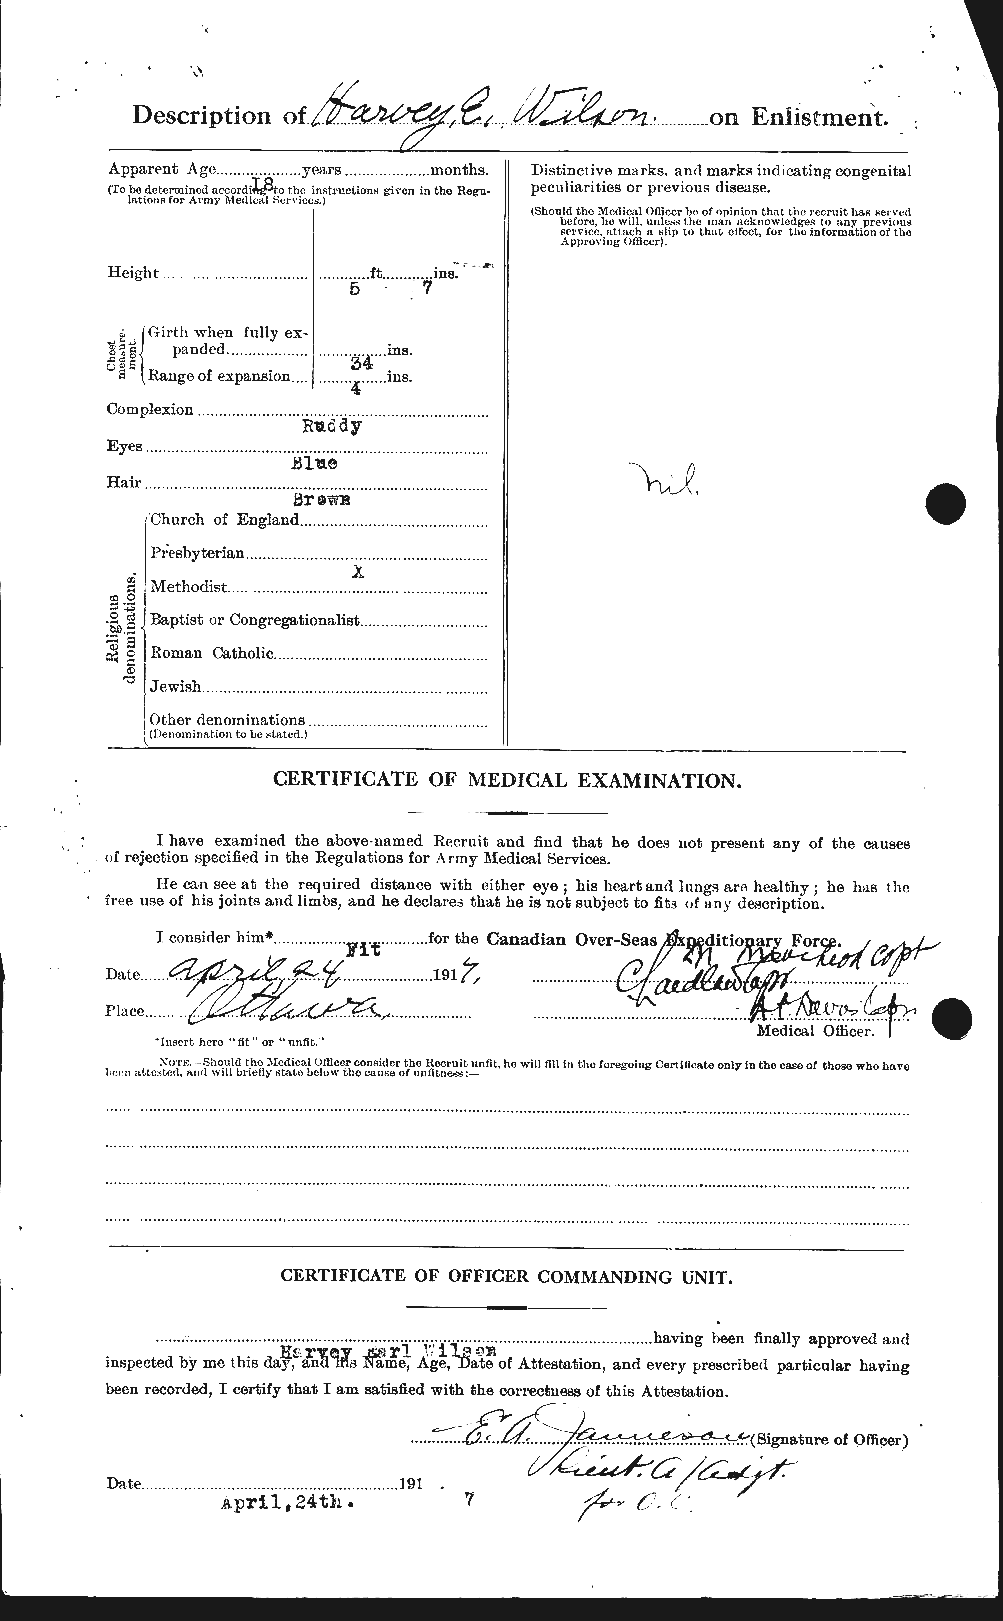 Personnel Records of the First World War - CEF 679481b